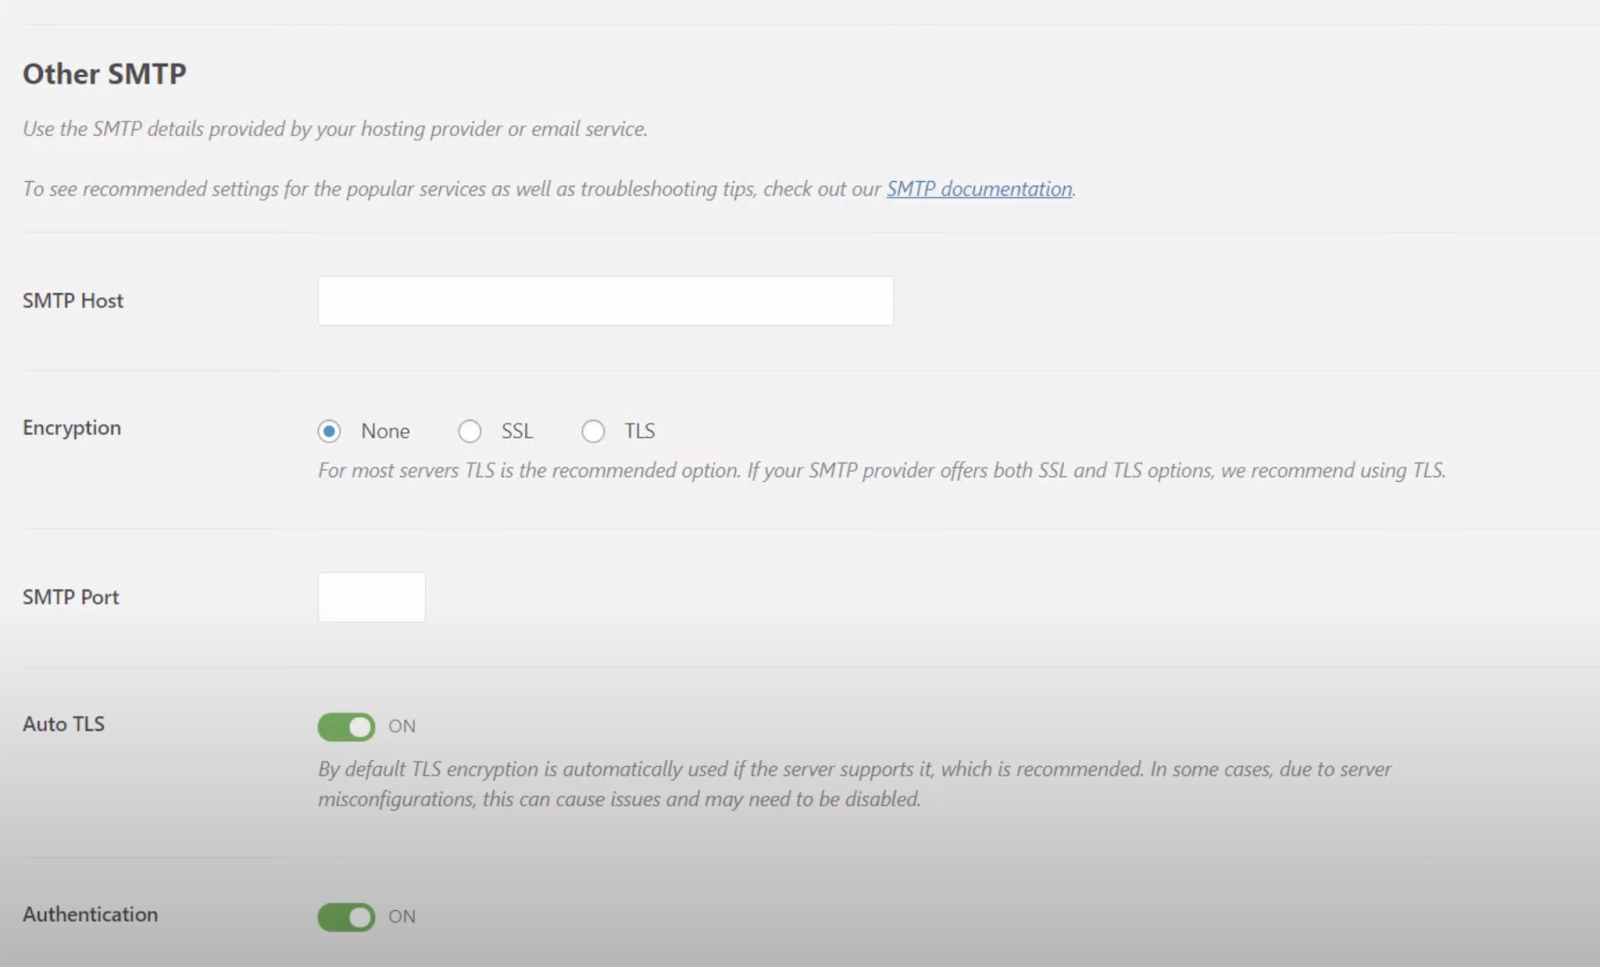 This image is showing the Other SMTP section in the WordPress settings